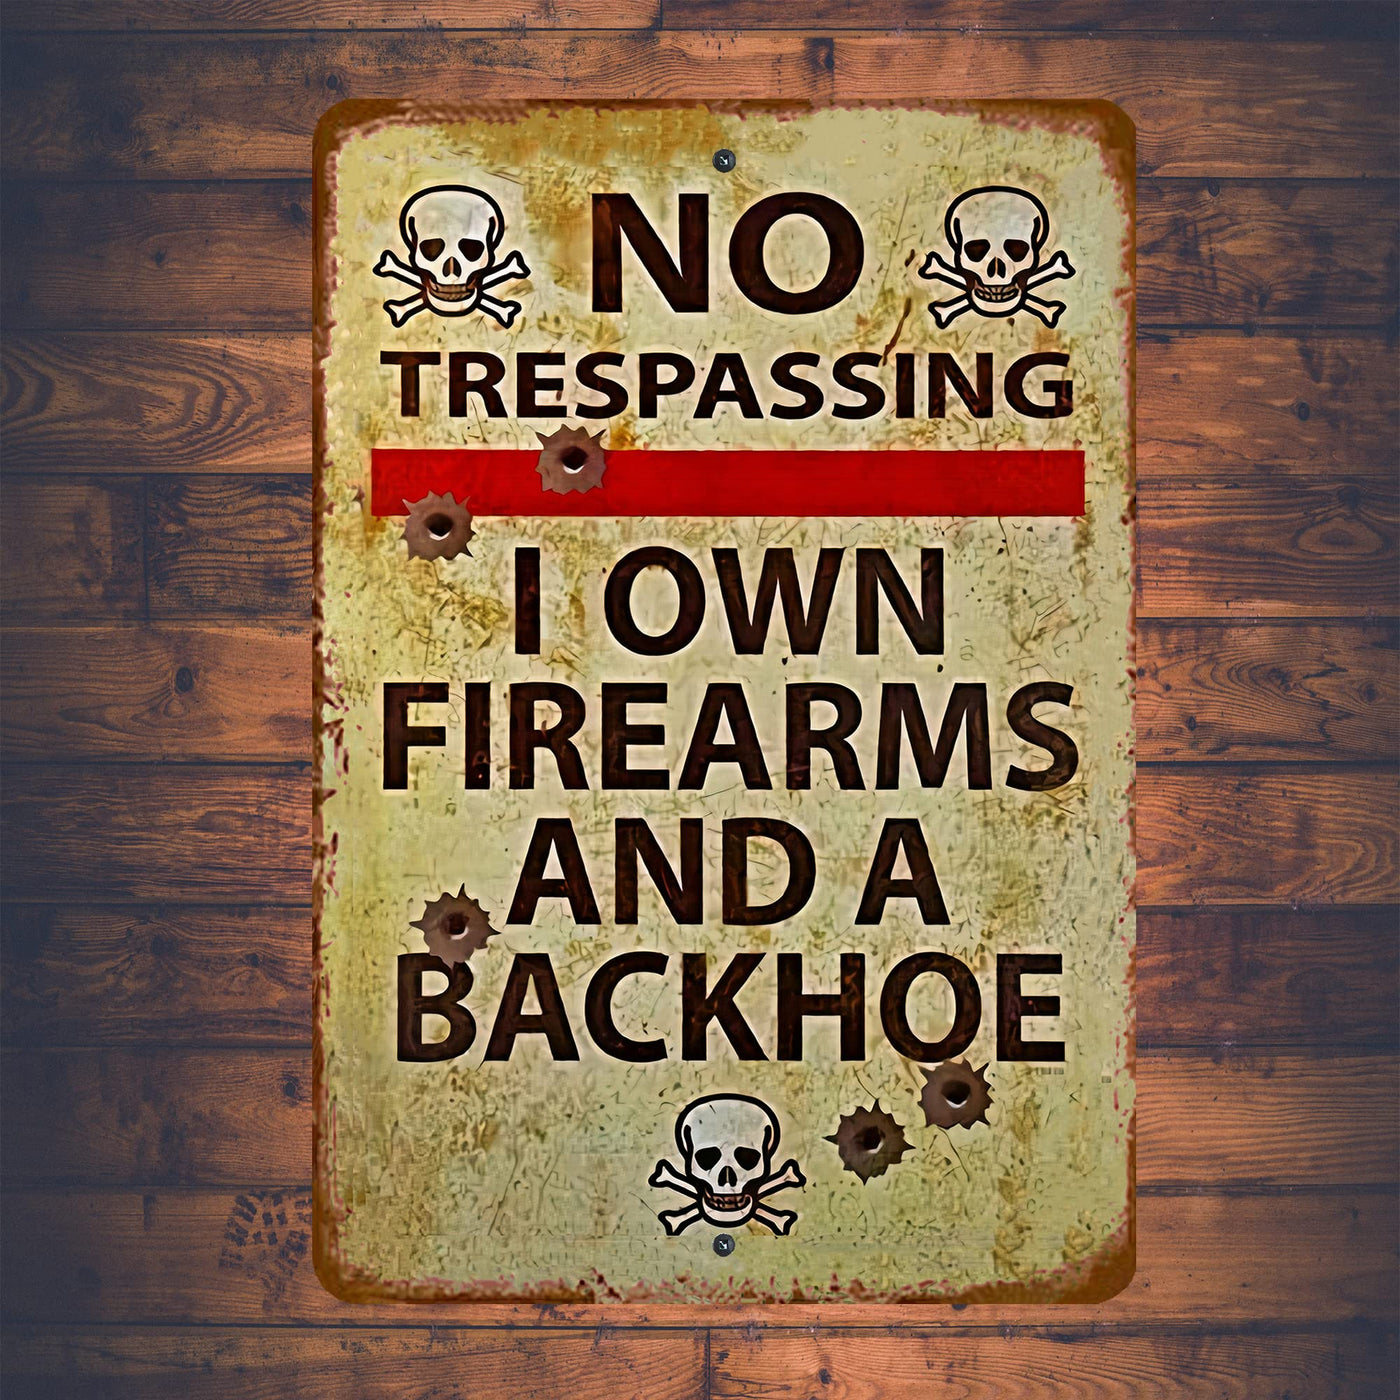 No Trespassing -I Own Firearms Metal Signs Funny Wall Art -8 x 12" Rustic Tin Sign for Home, Man Cave, Garage, Shop, Military Decor. Perfect 2nd Amendment Sign- Gun Accessories -Veterans Gifts!